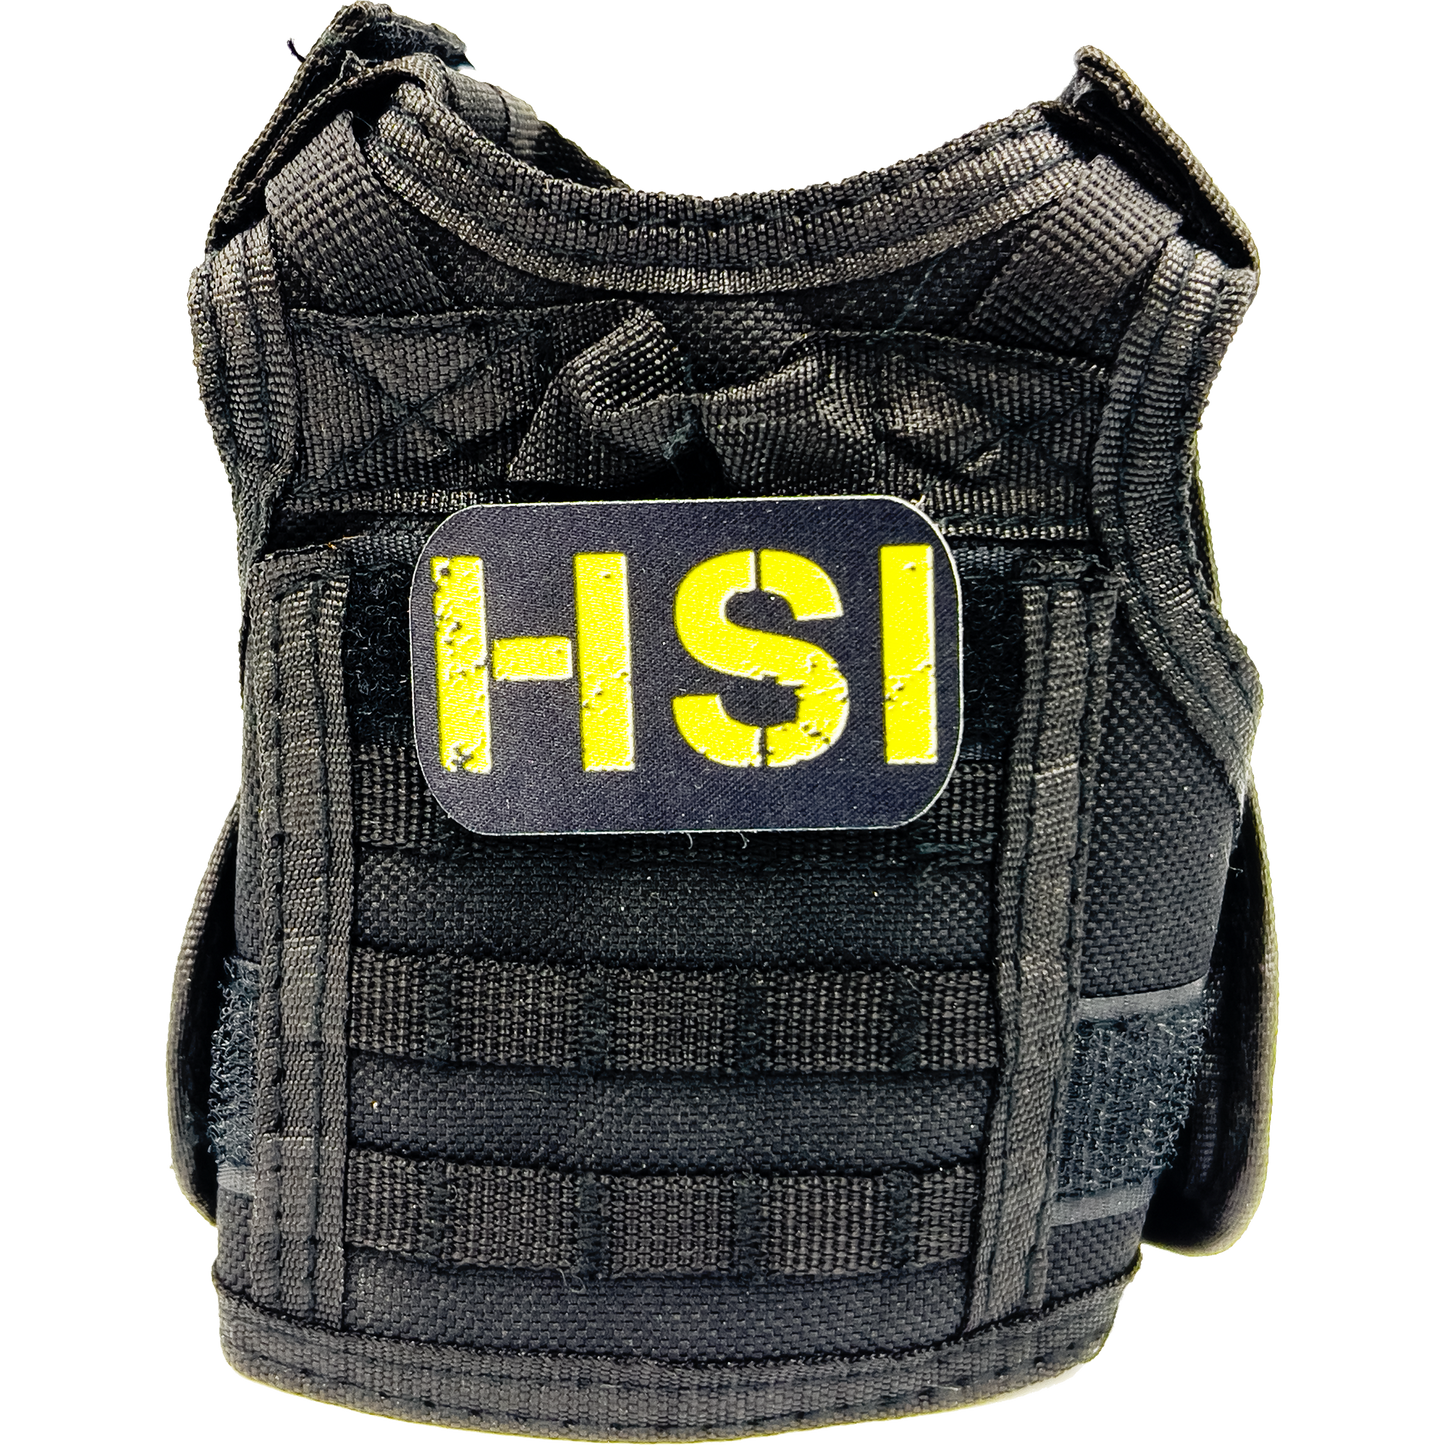 BL2-013 HSI SPECIAL AGENT Tactical Beverage Bottle or Can Cooler Vest with removable patches perfect gift for Challenge Coin collectors